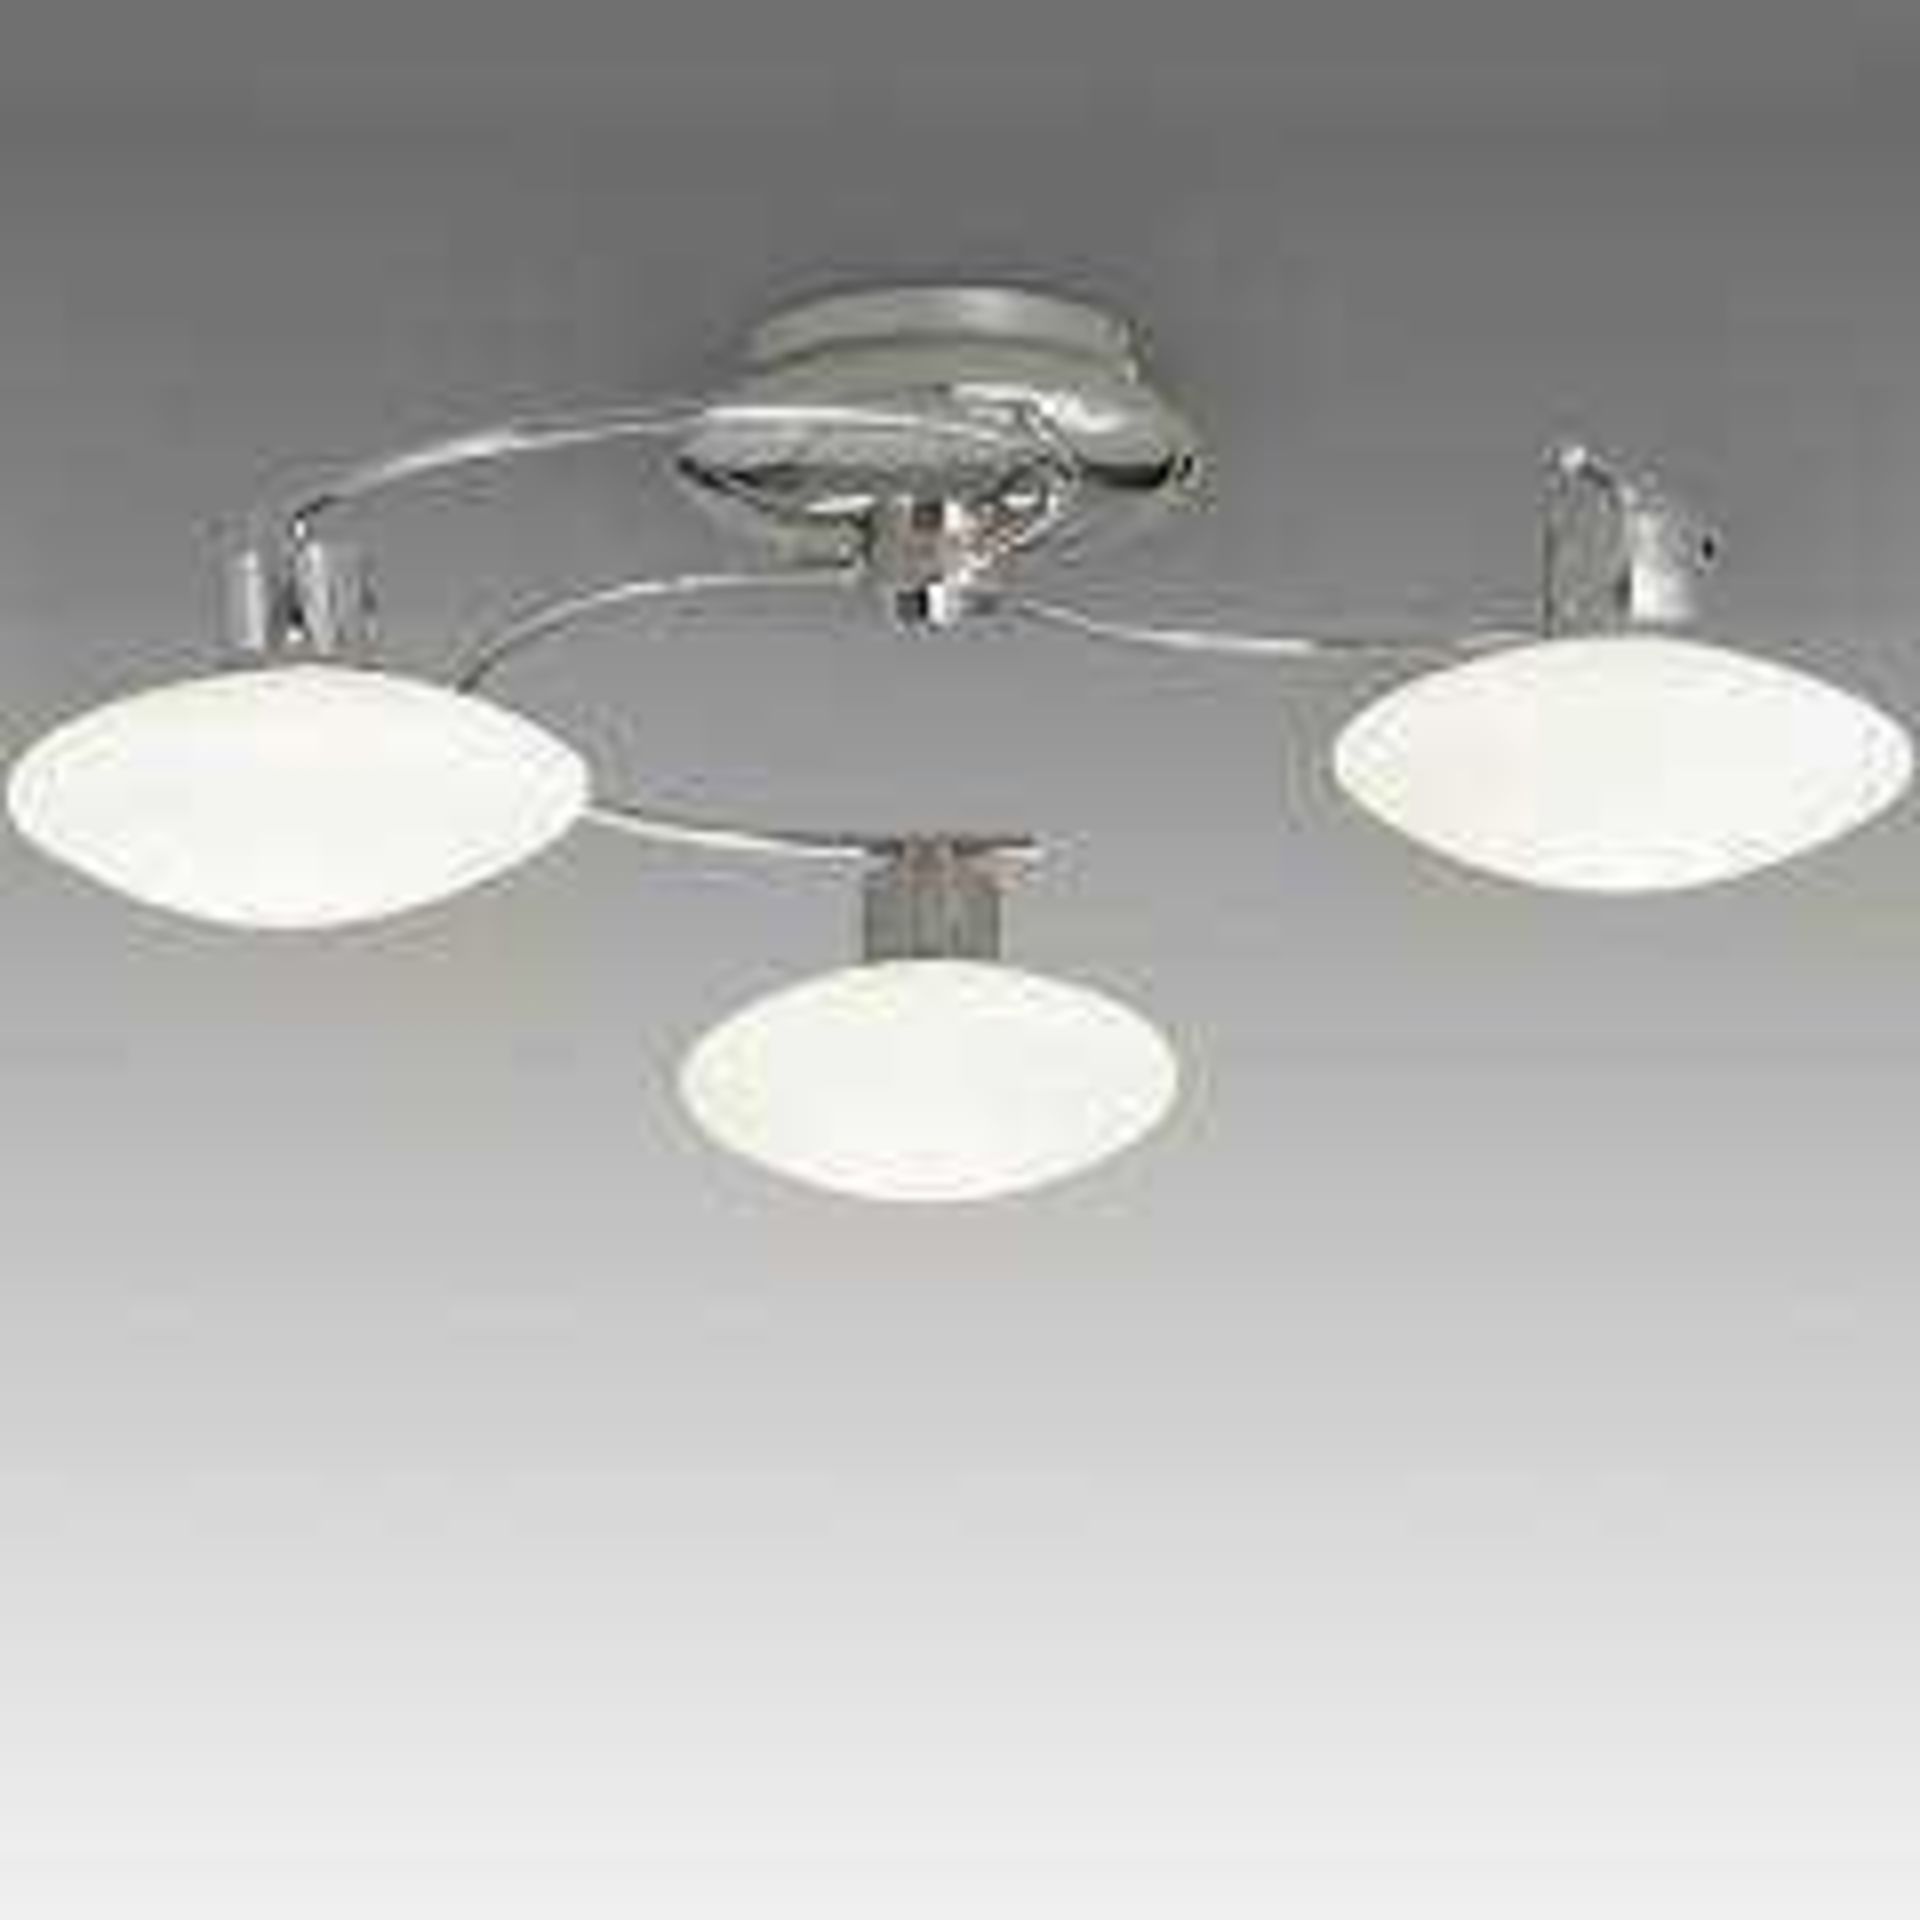 RRP £125 Boxed John Lewis And Partners Tameo 3 Light Semi Flush Ceiling Light 166180 (Appraisals